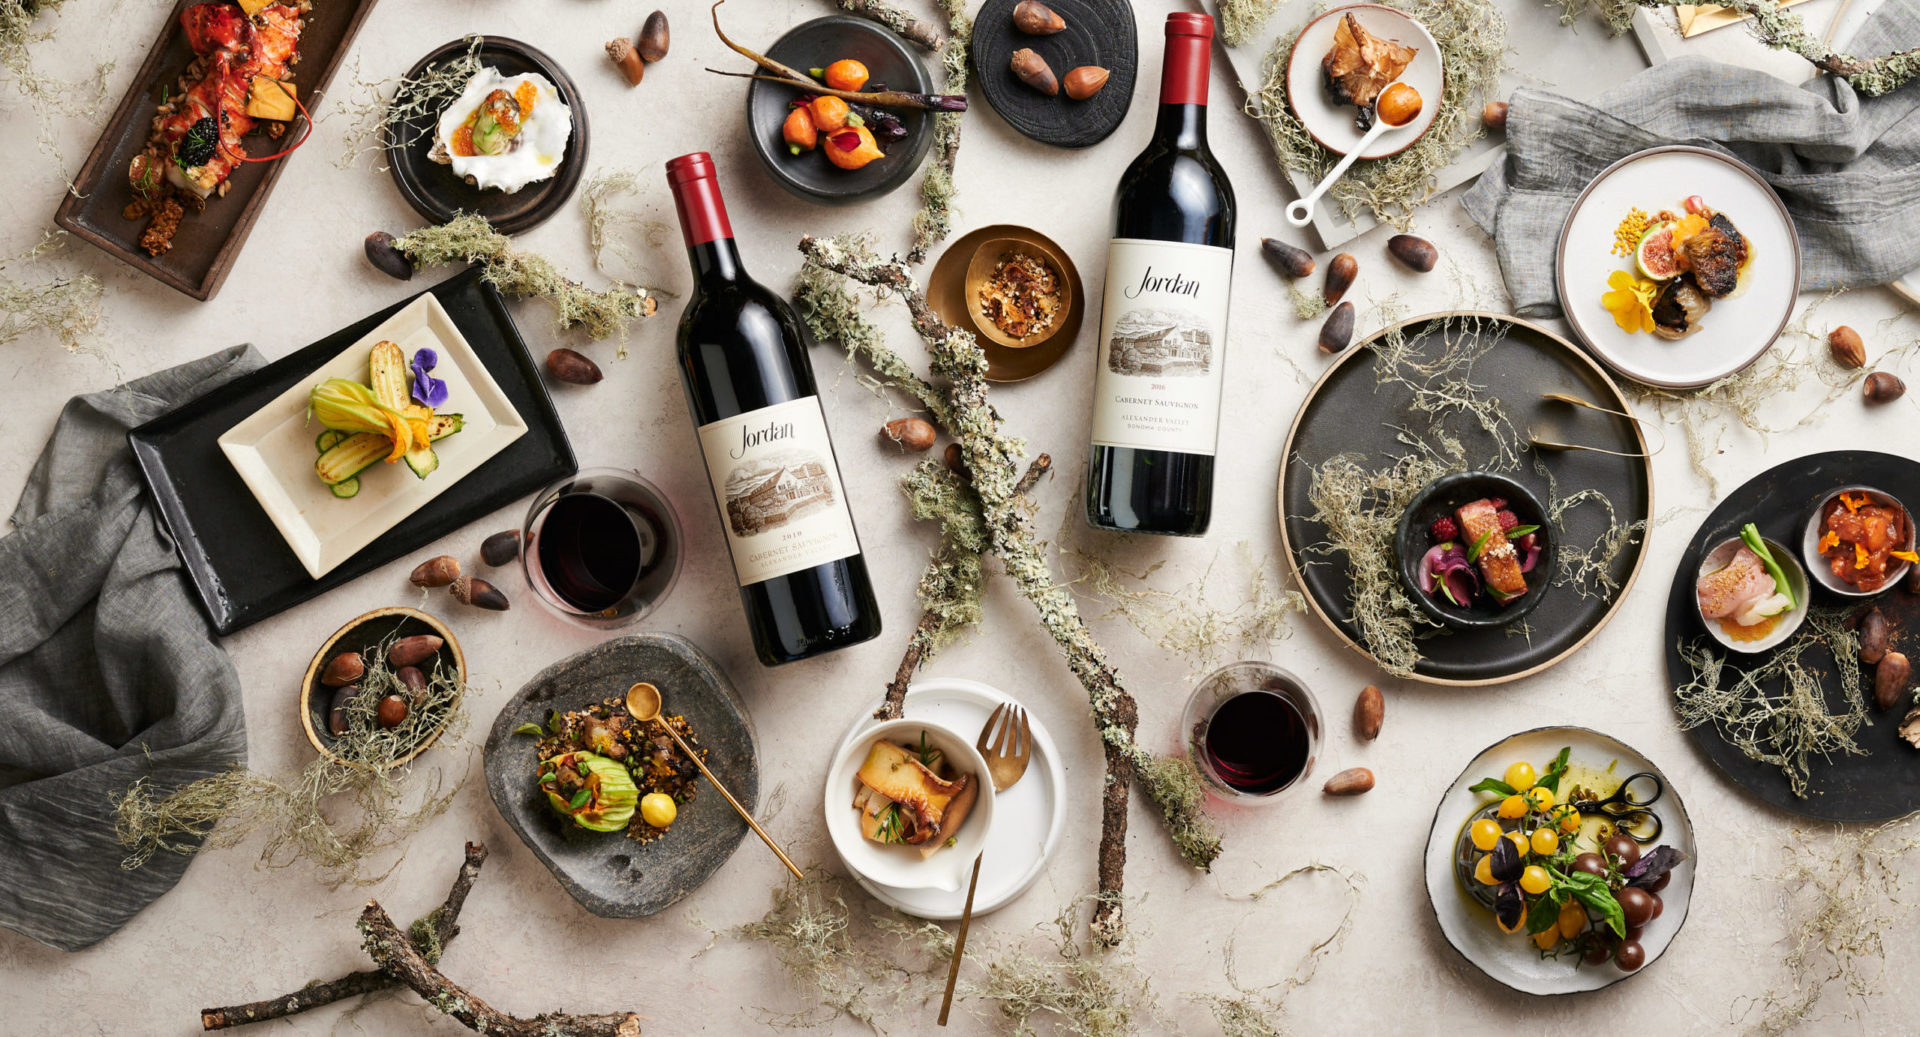 Bottles of Jordan Cabernet Sauvignon on a tabletop with food, linens, branches and acorns